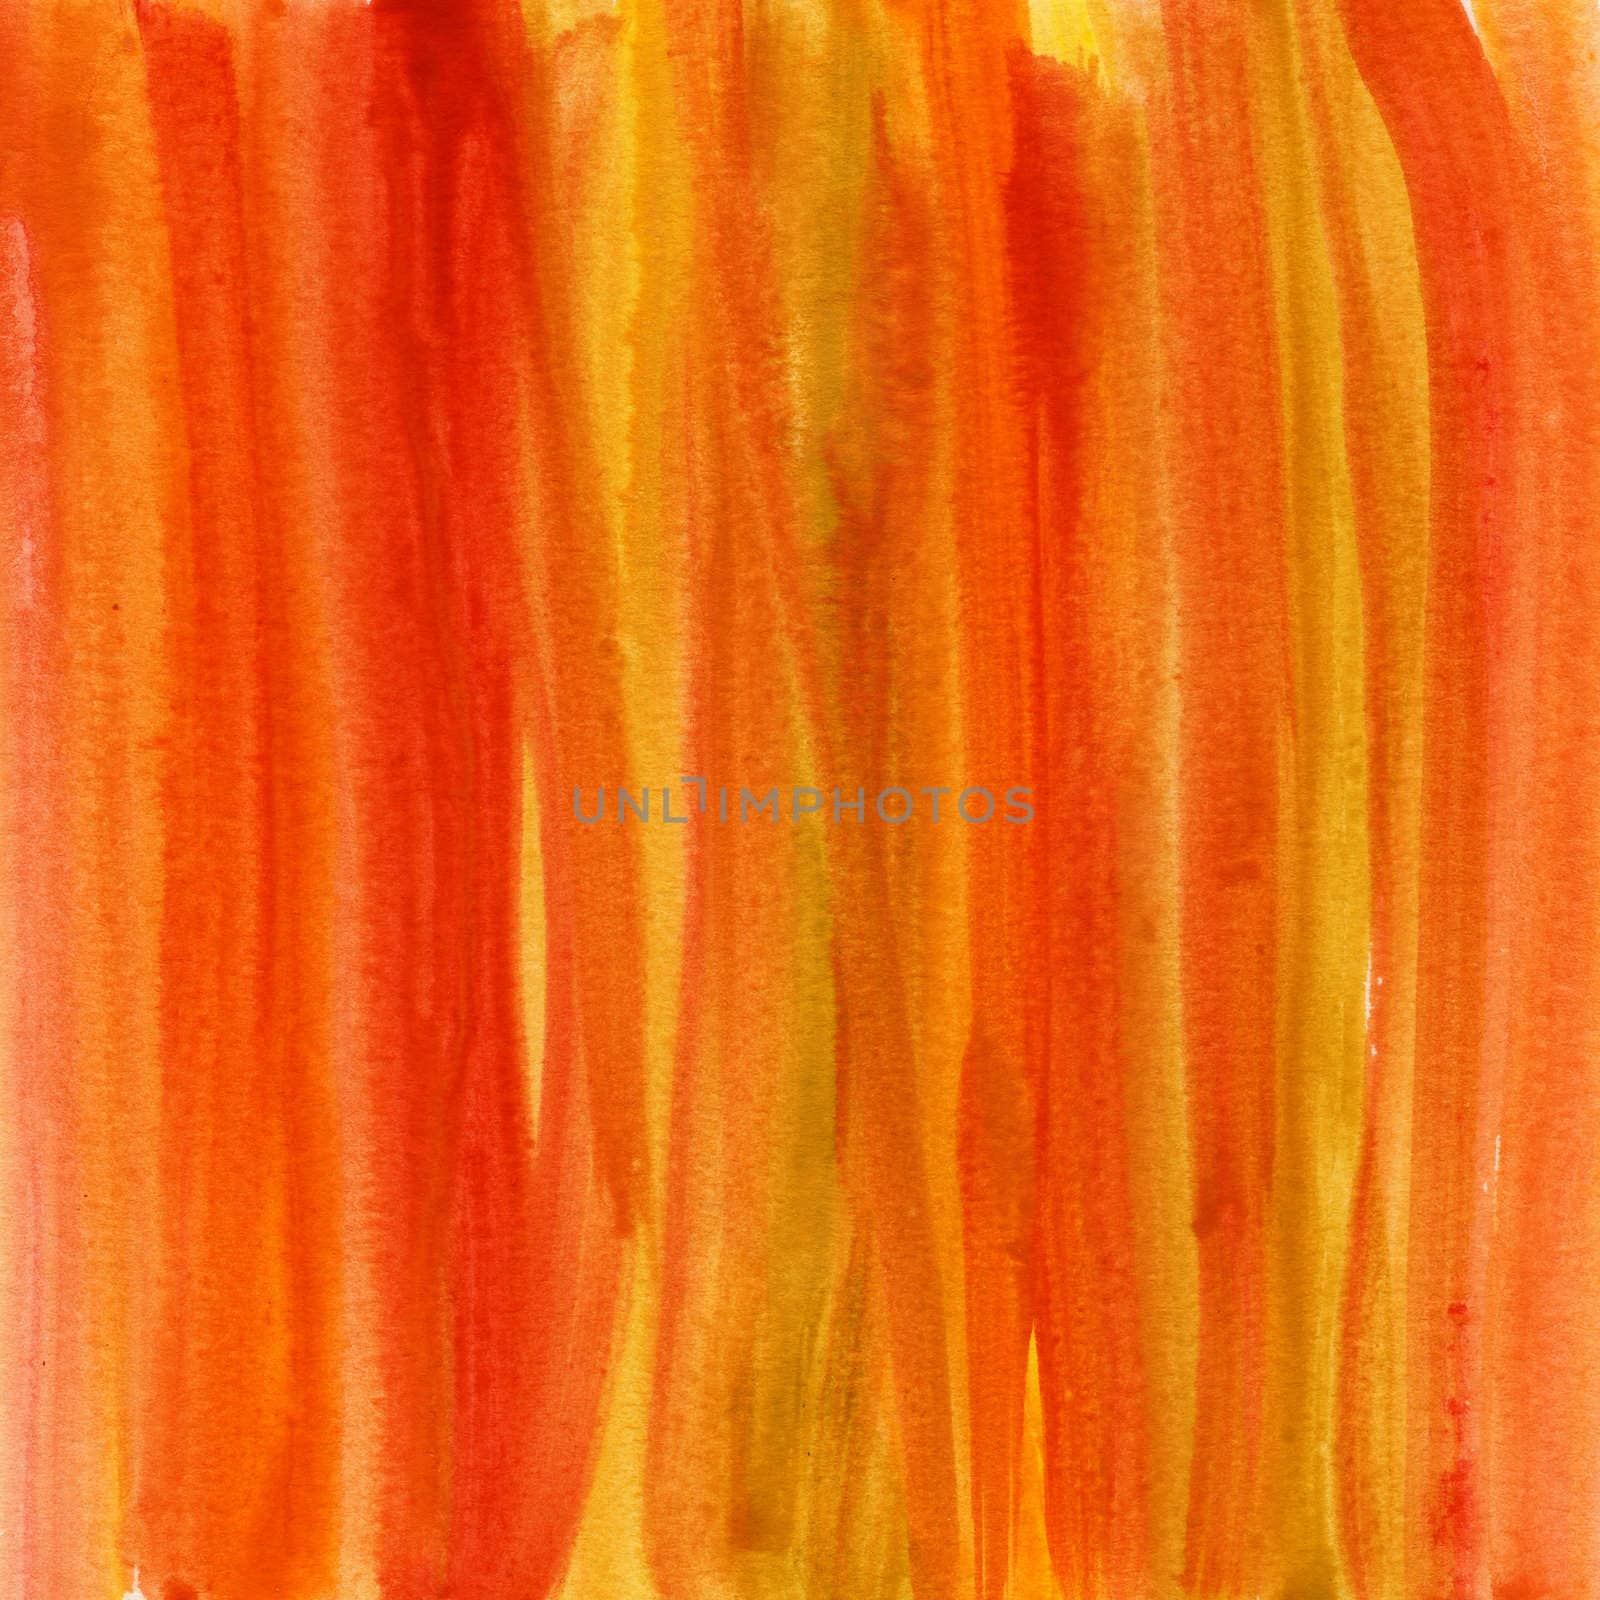 red, brown, yellow watercolor abstract background with paper texture and brush stroke pattern, self made